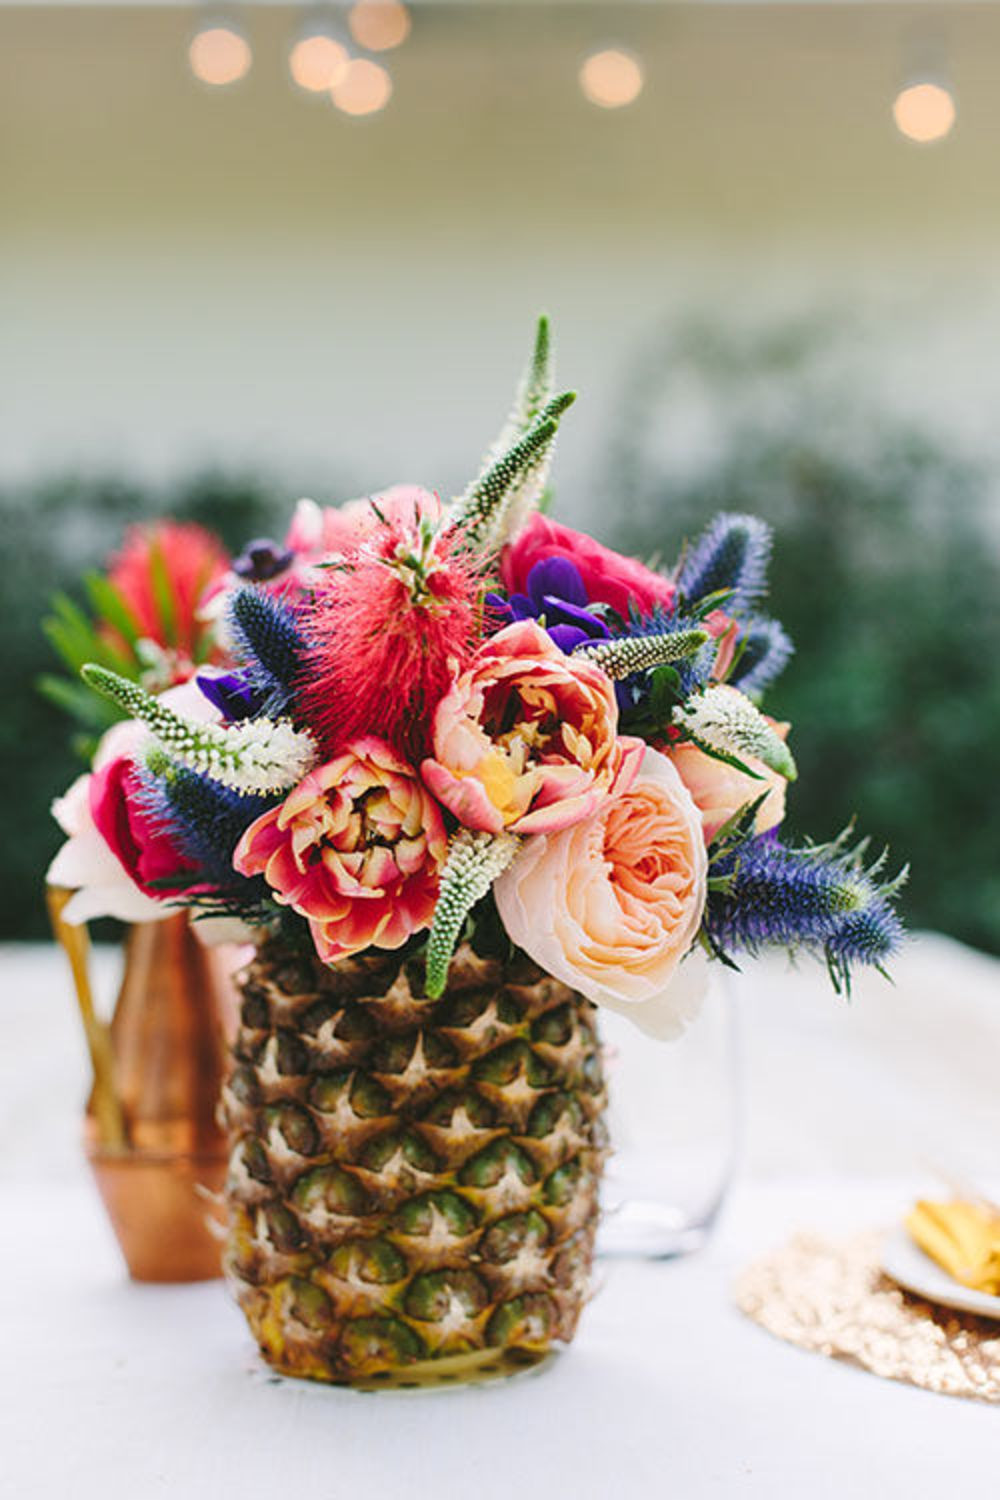 15 Recommended Flower Arrangements with Fruit In Vase 2024 free download flower arrangements with fruit in vase of 15 things to do before summer ends summer wedding and wedding things pertaining to summer to do list 15 things to do before summer ends domino flowe